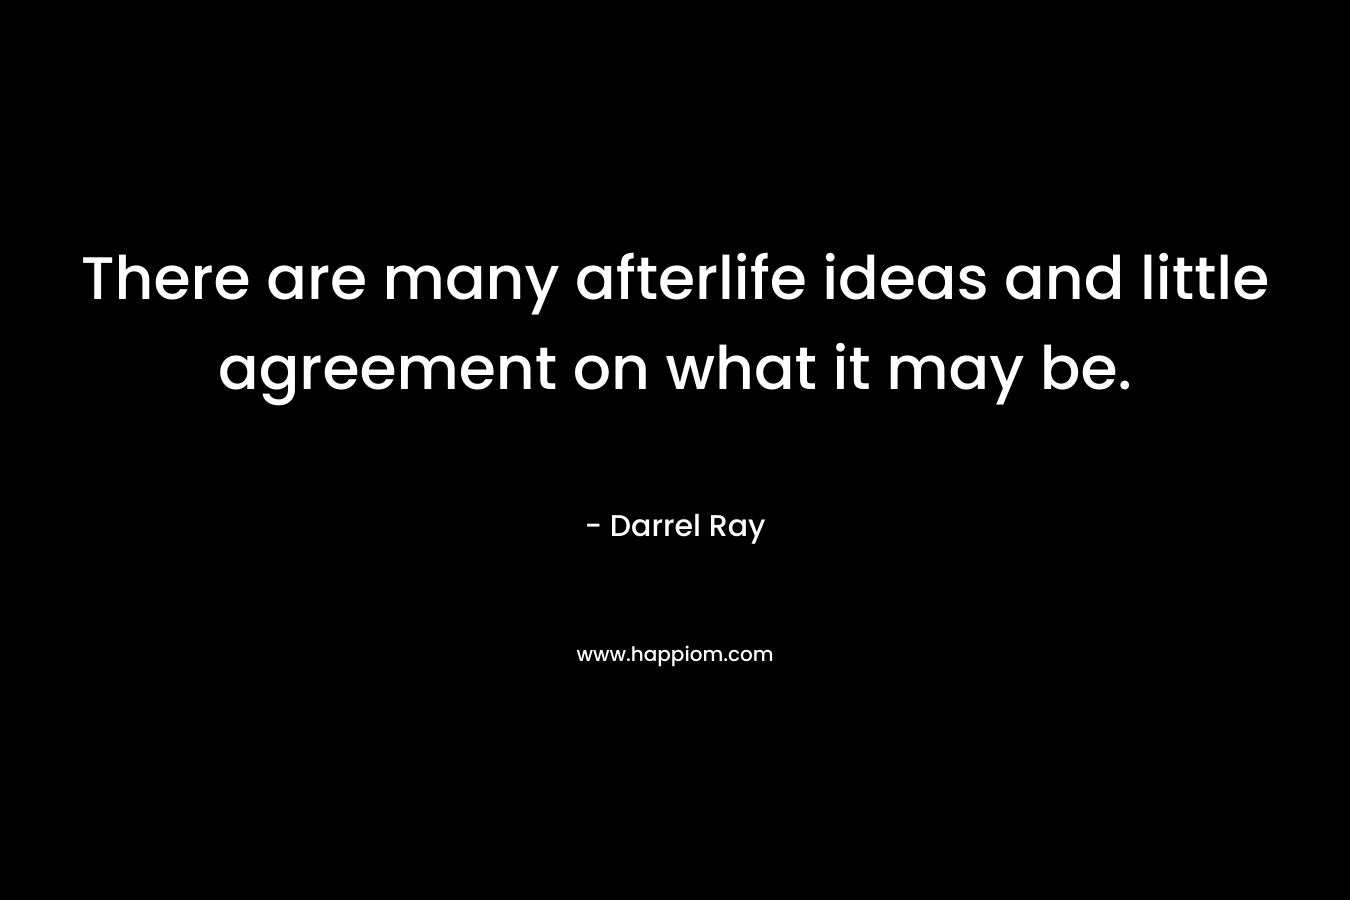 There are many afterlife ideas and little agreement on what it may be. – Darrel Ray